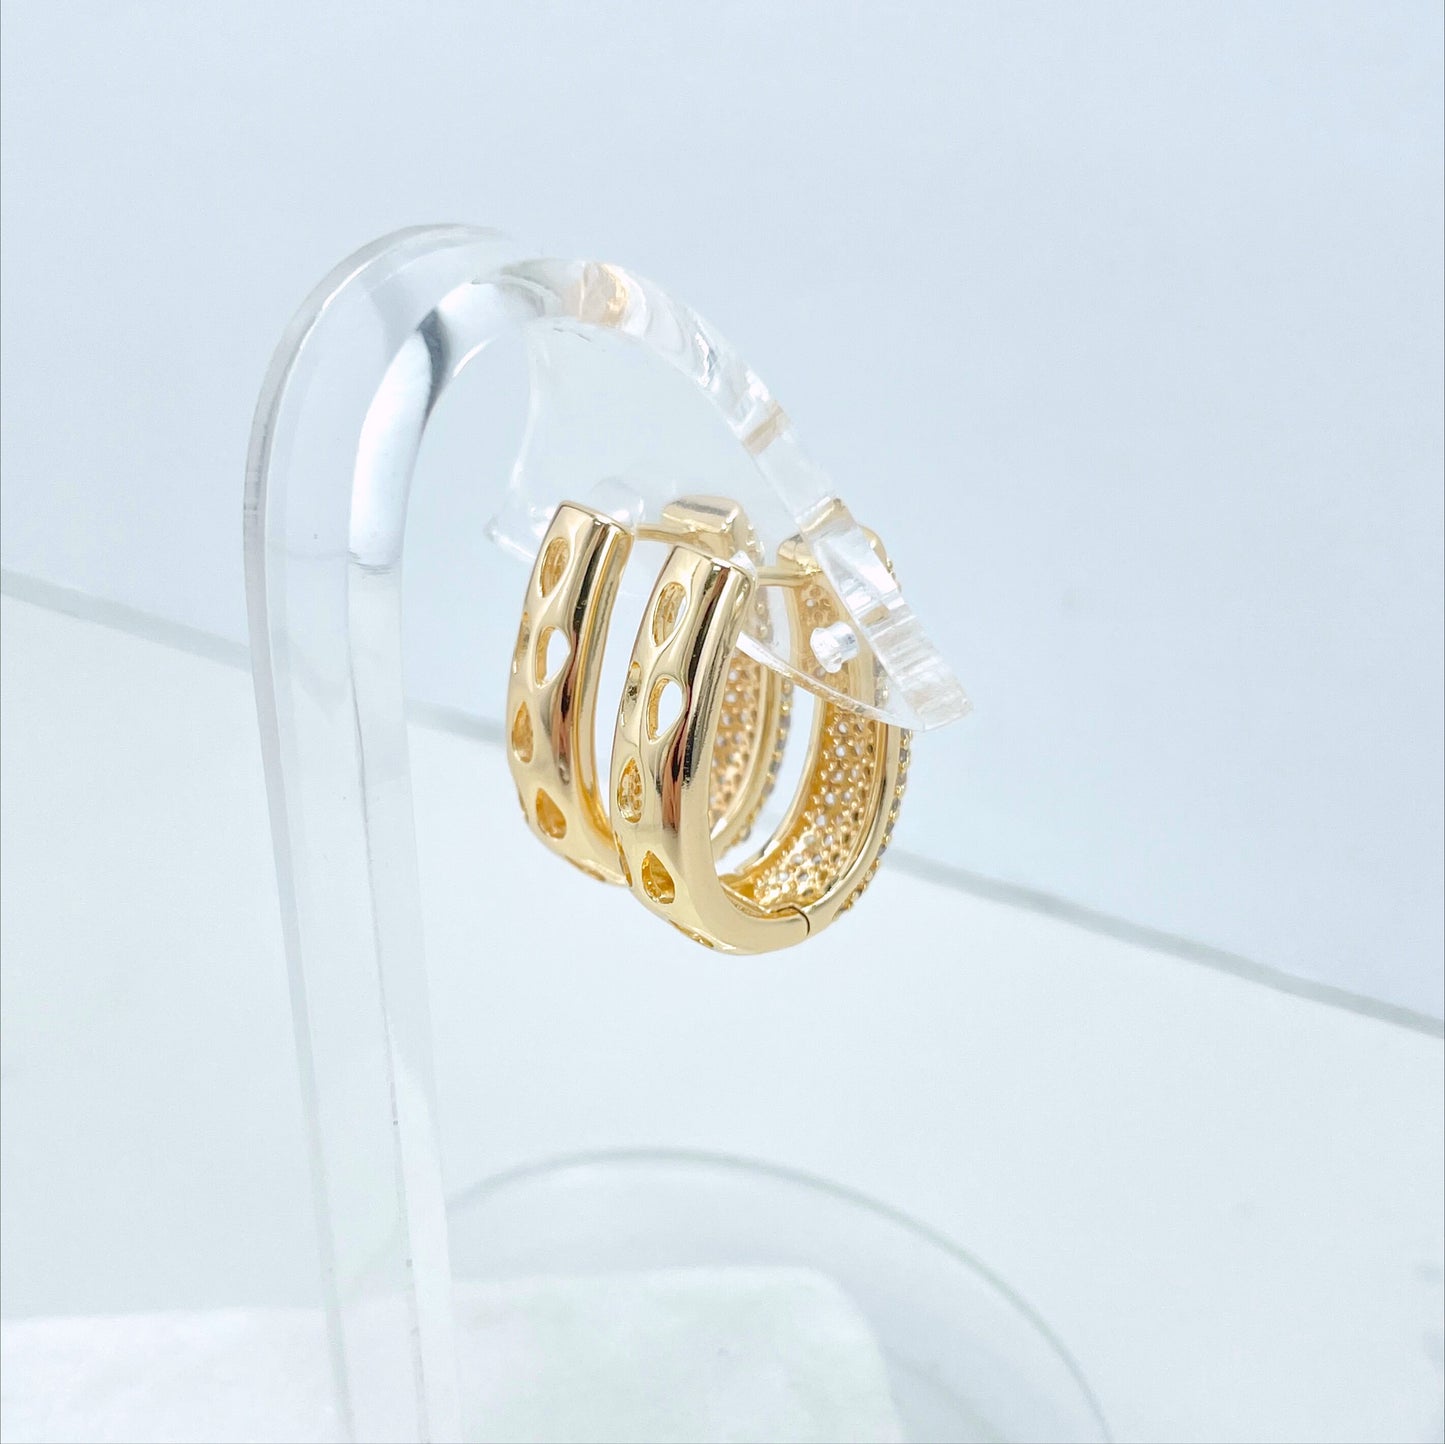 18k Gold Filled with Micro Cubic Zirconia, Hole Tear, 24mm Huggie Earrings, 6mm Thickness, Wholesale Jewelry Making Supplie